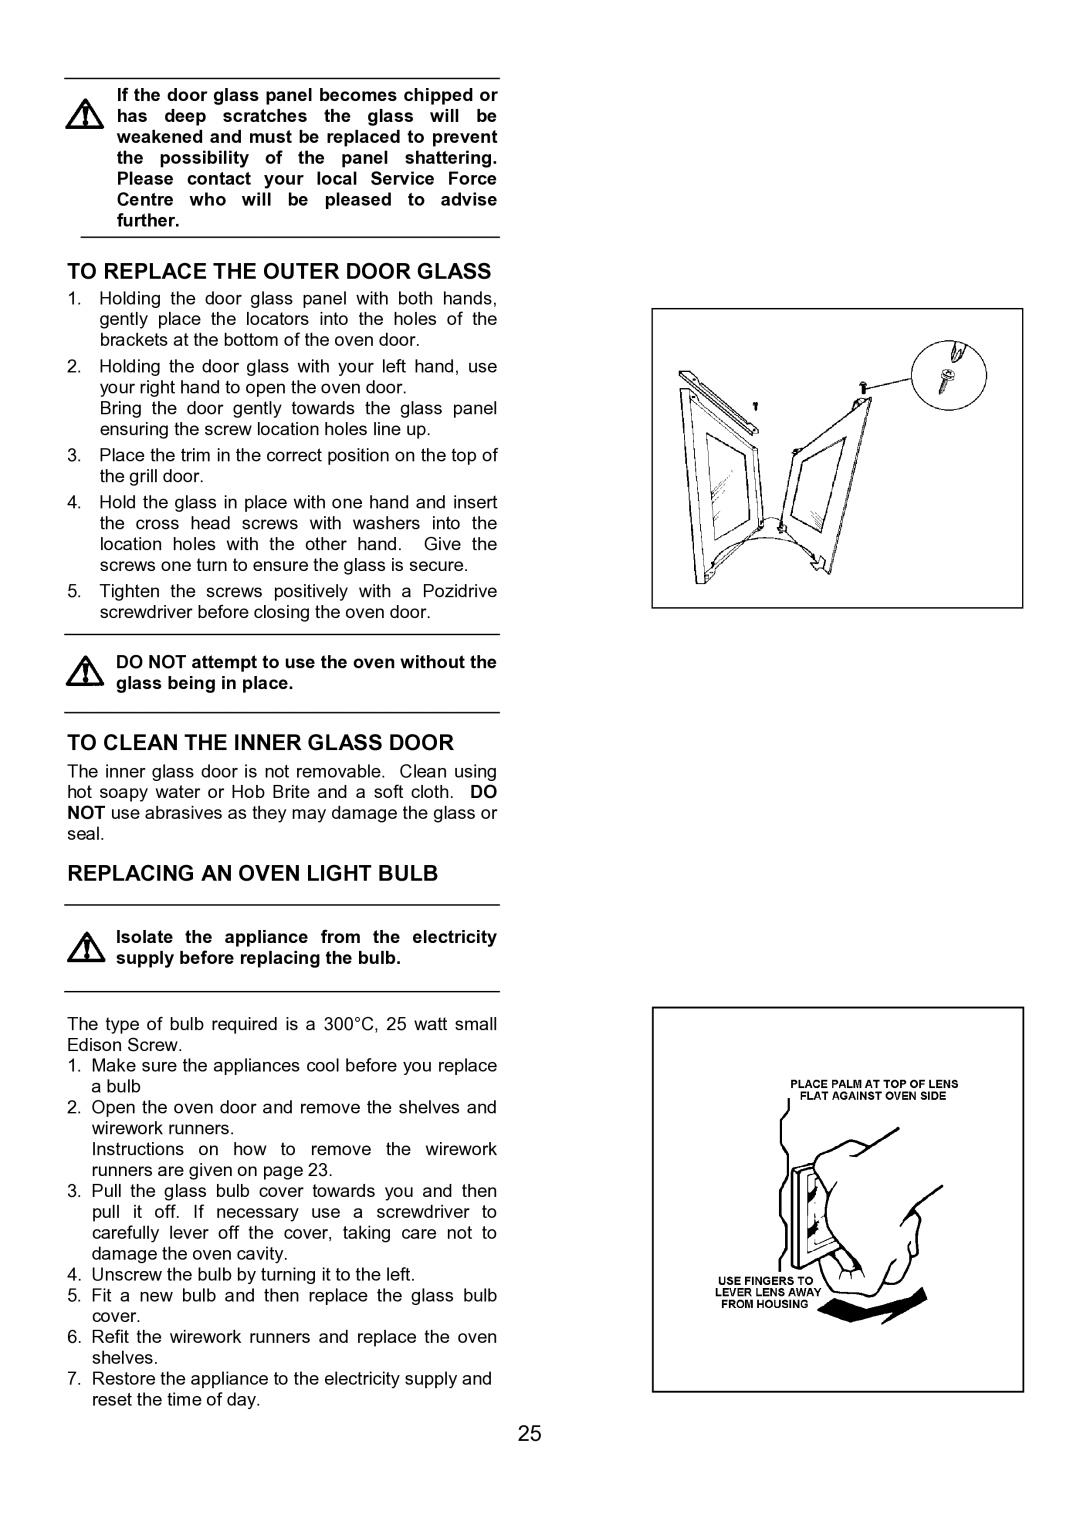 Electrolux EOU 5330 manual To Replace the Outer Door Glass, To Clean the Inner Glass Door, Replacing AN Oven Light Bulb 